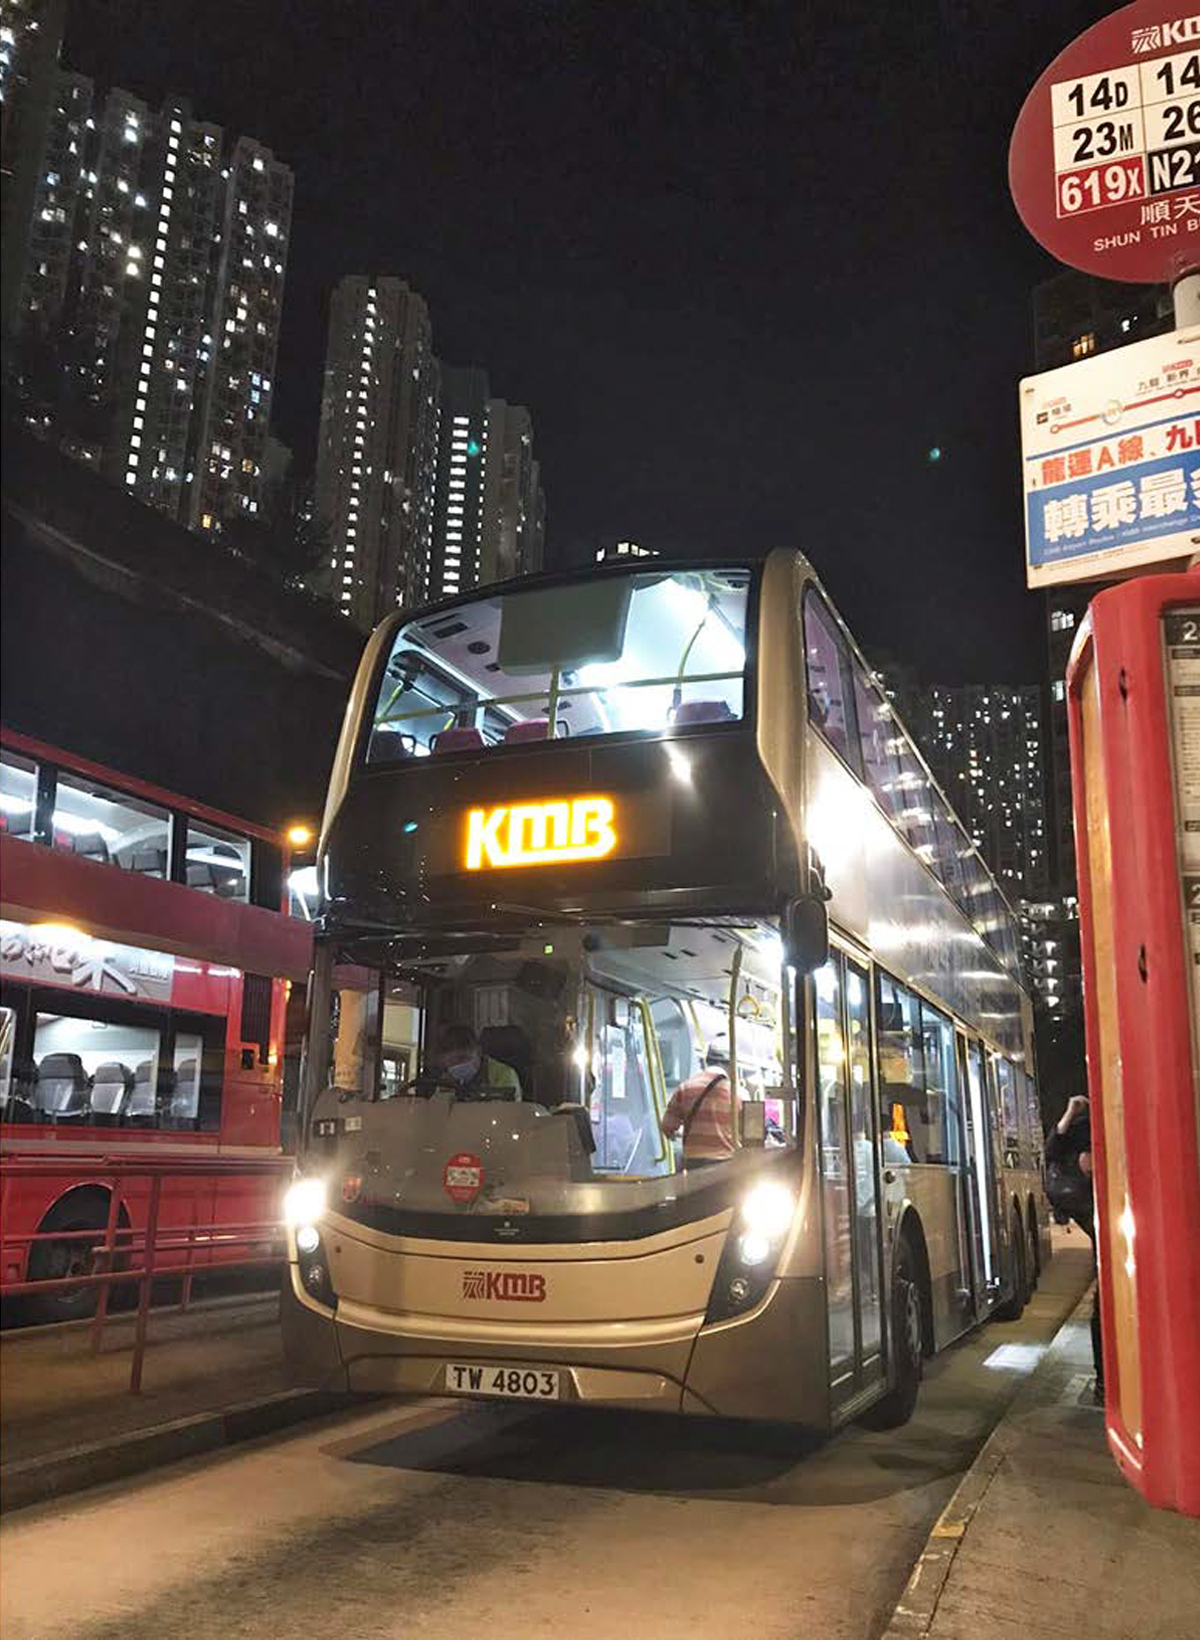 Photograph of double-decker bus on street in Hong Kong